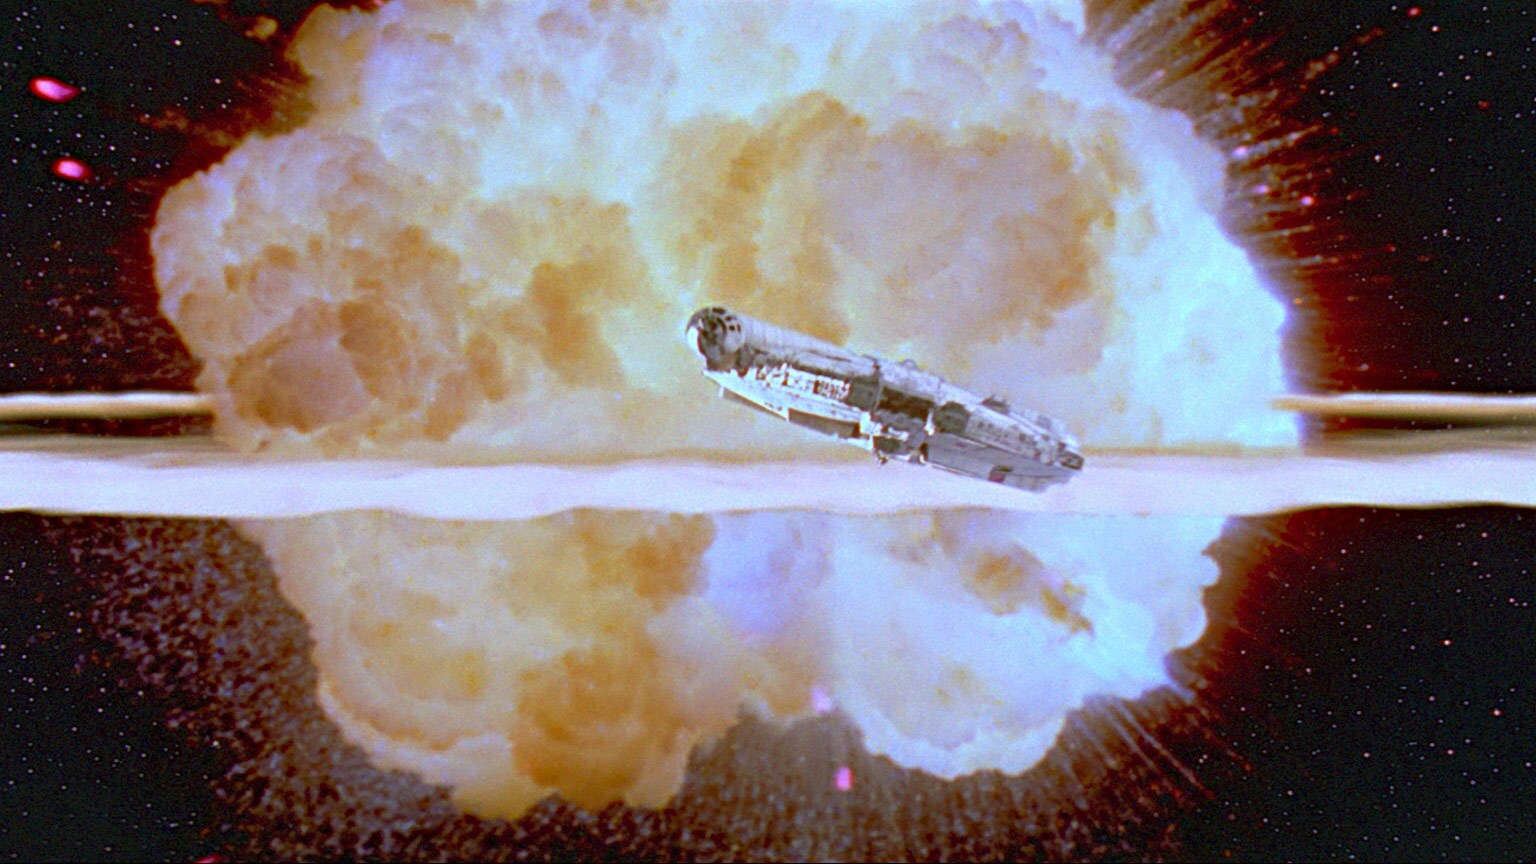 10 Great Star Wars Action Sequences